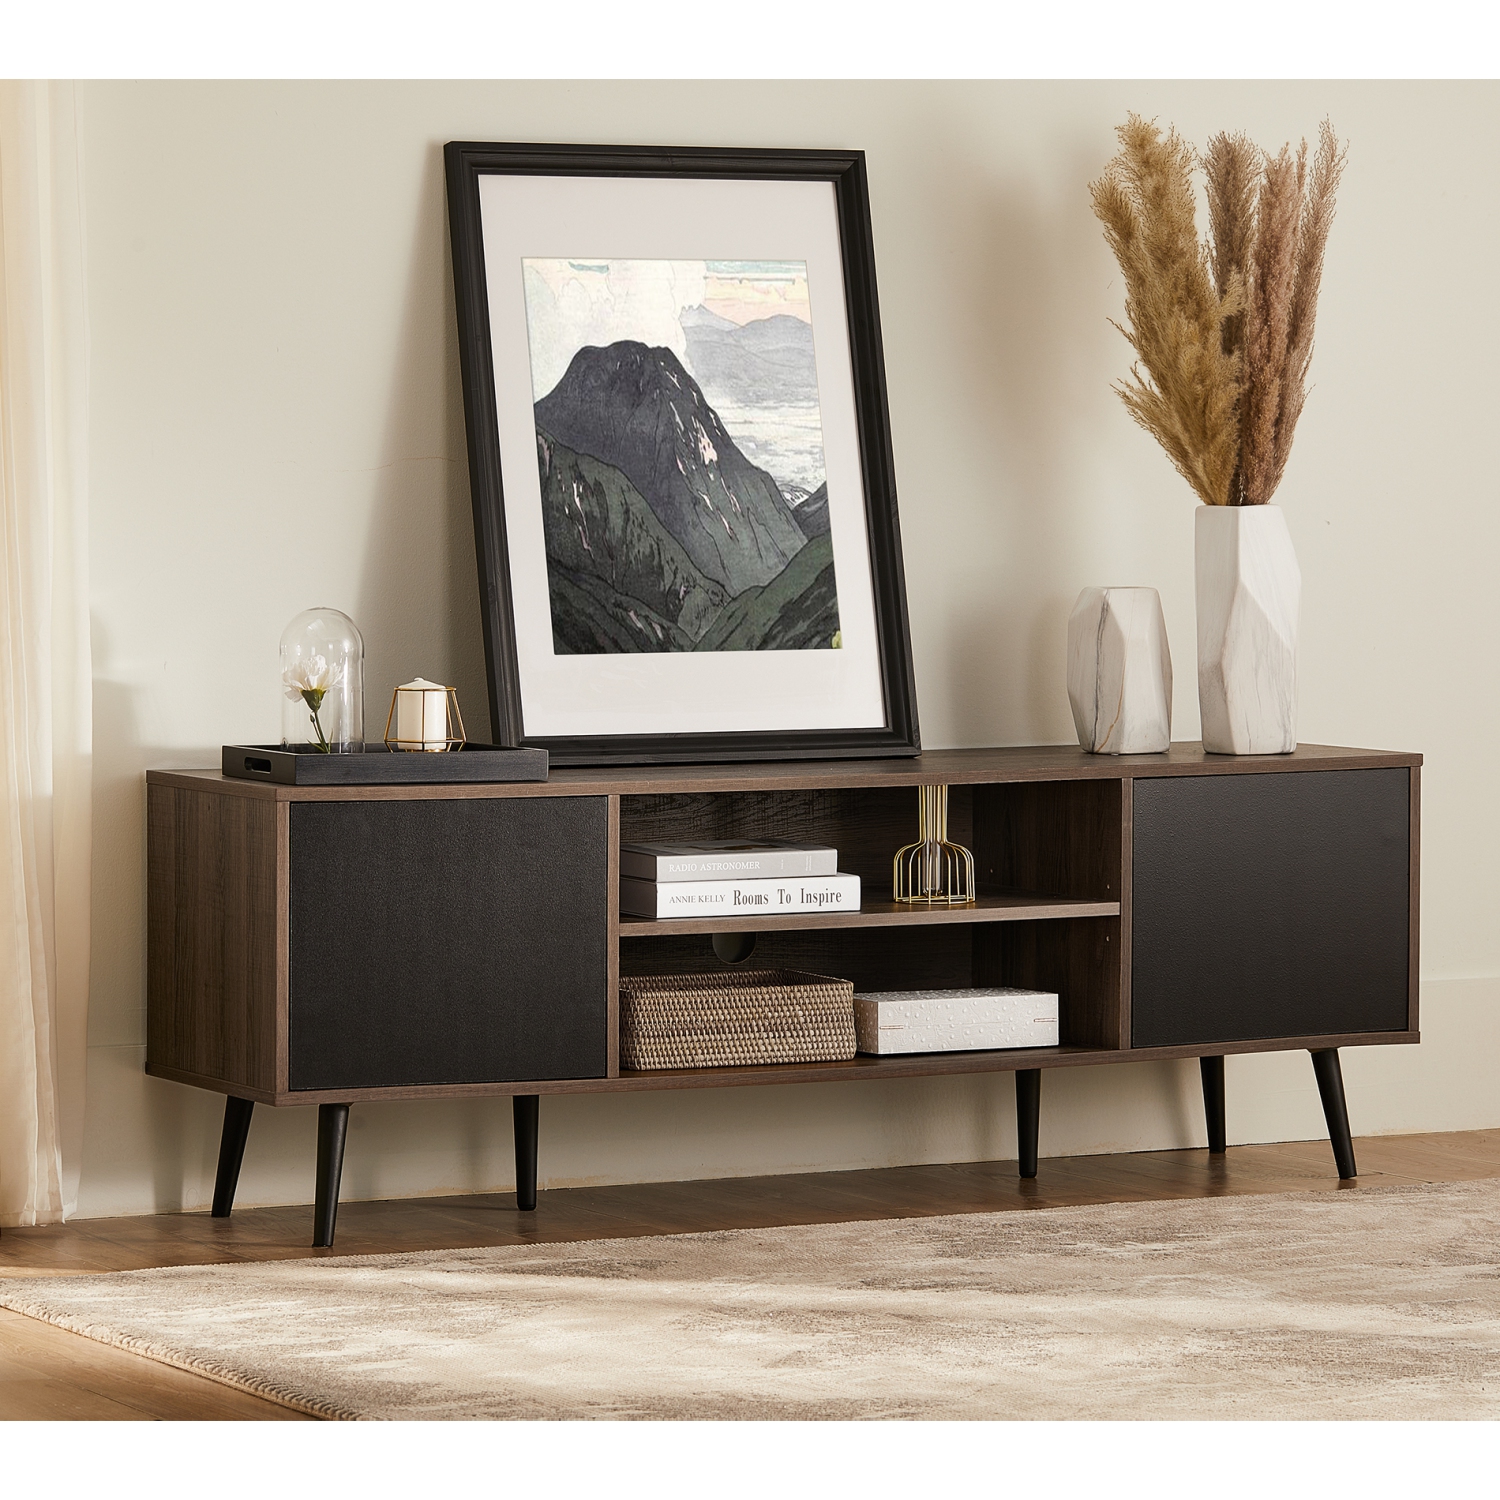 WAMPAT Mid-Century Modern TV Stand for 50/55/65 Inch Flat Screen, Wood Media Console Table with Storage Cabinet, Brown